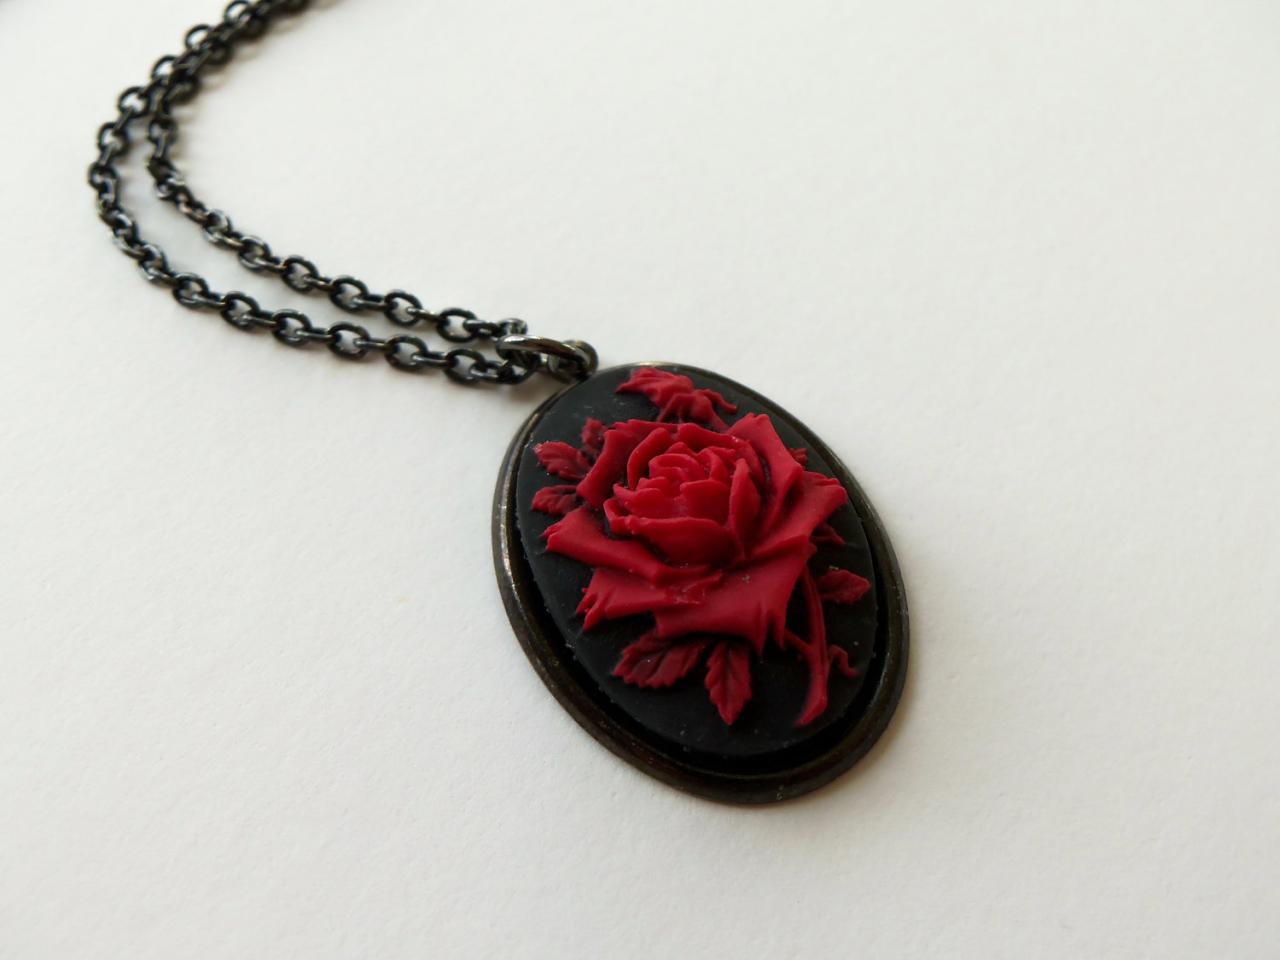 Rose Cameo Necklace Black Red Rose Pendant Gothic Jewelry Dark Red